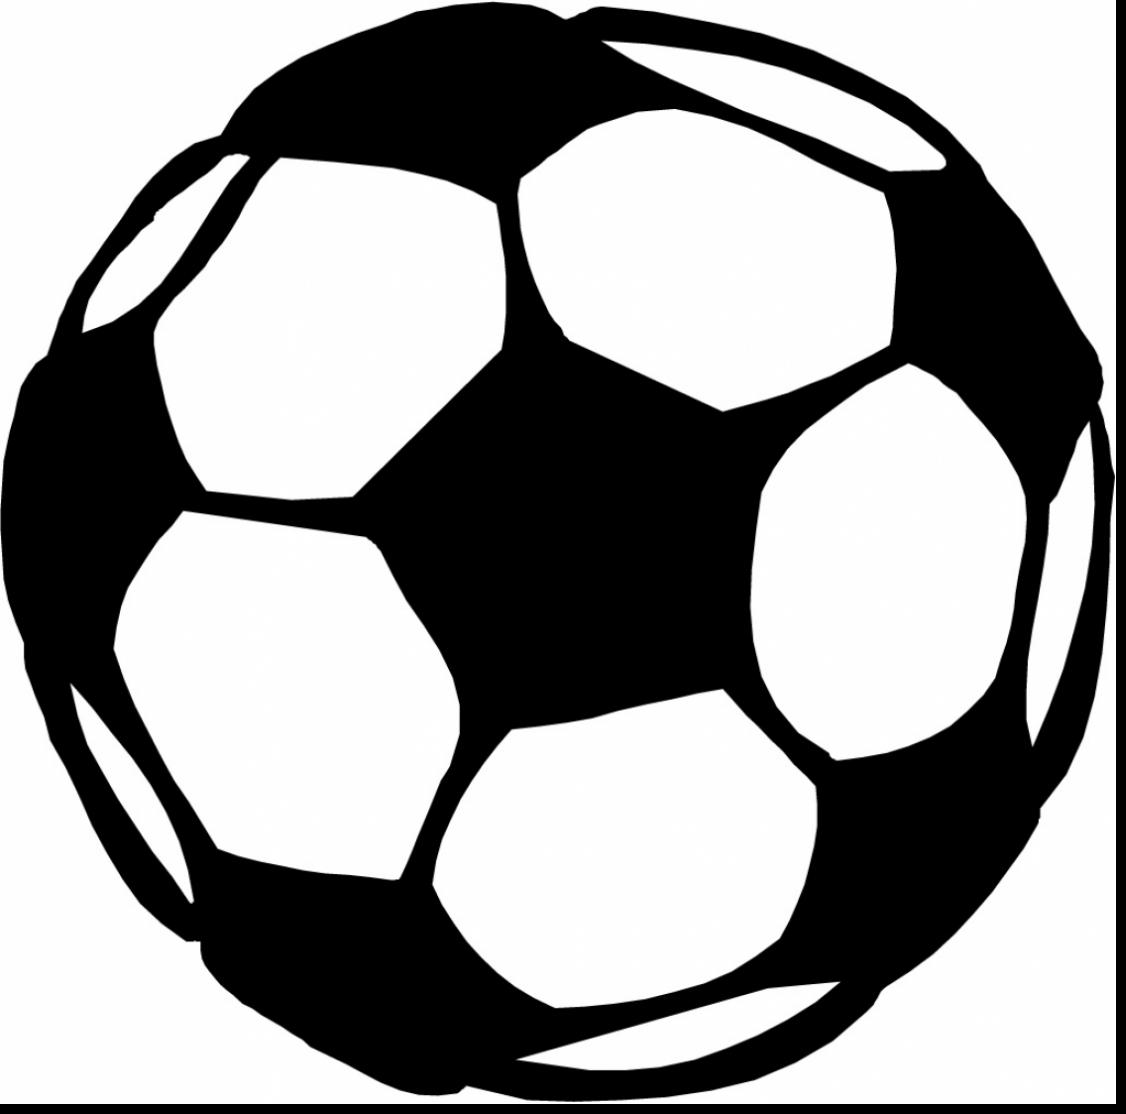 Soccer Ball Outline | Free download on ClipArtMag